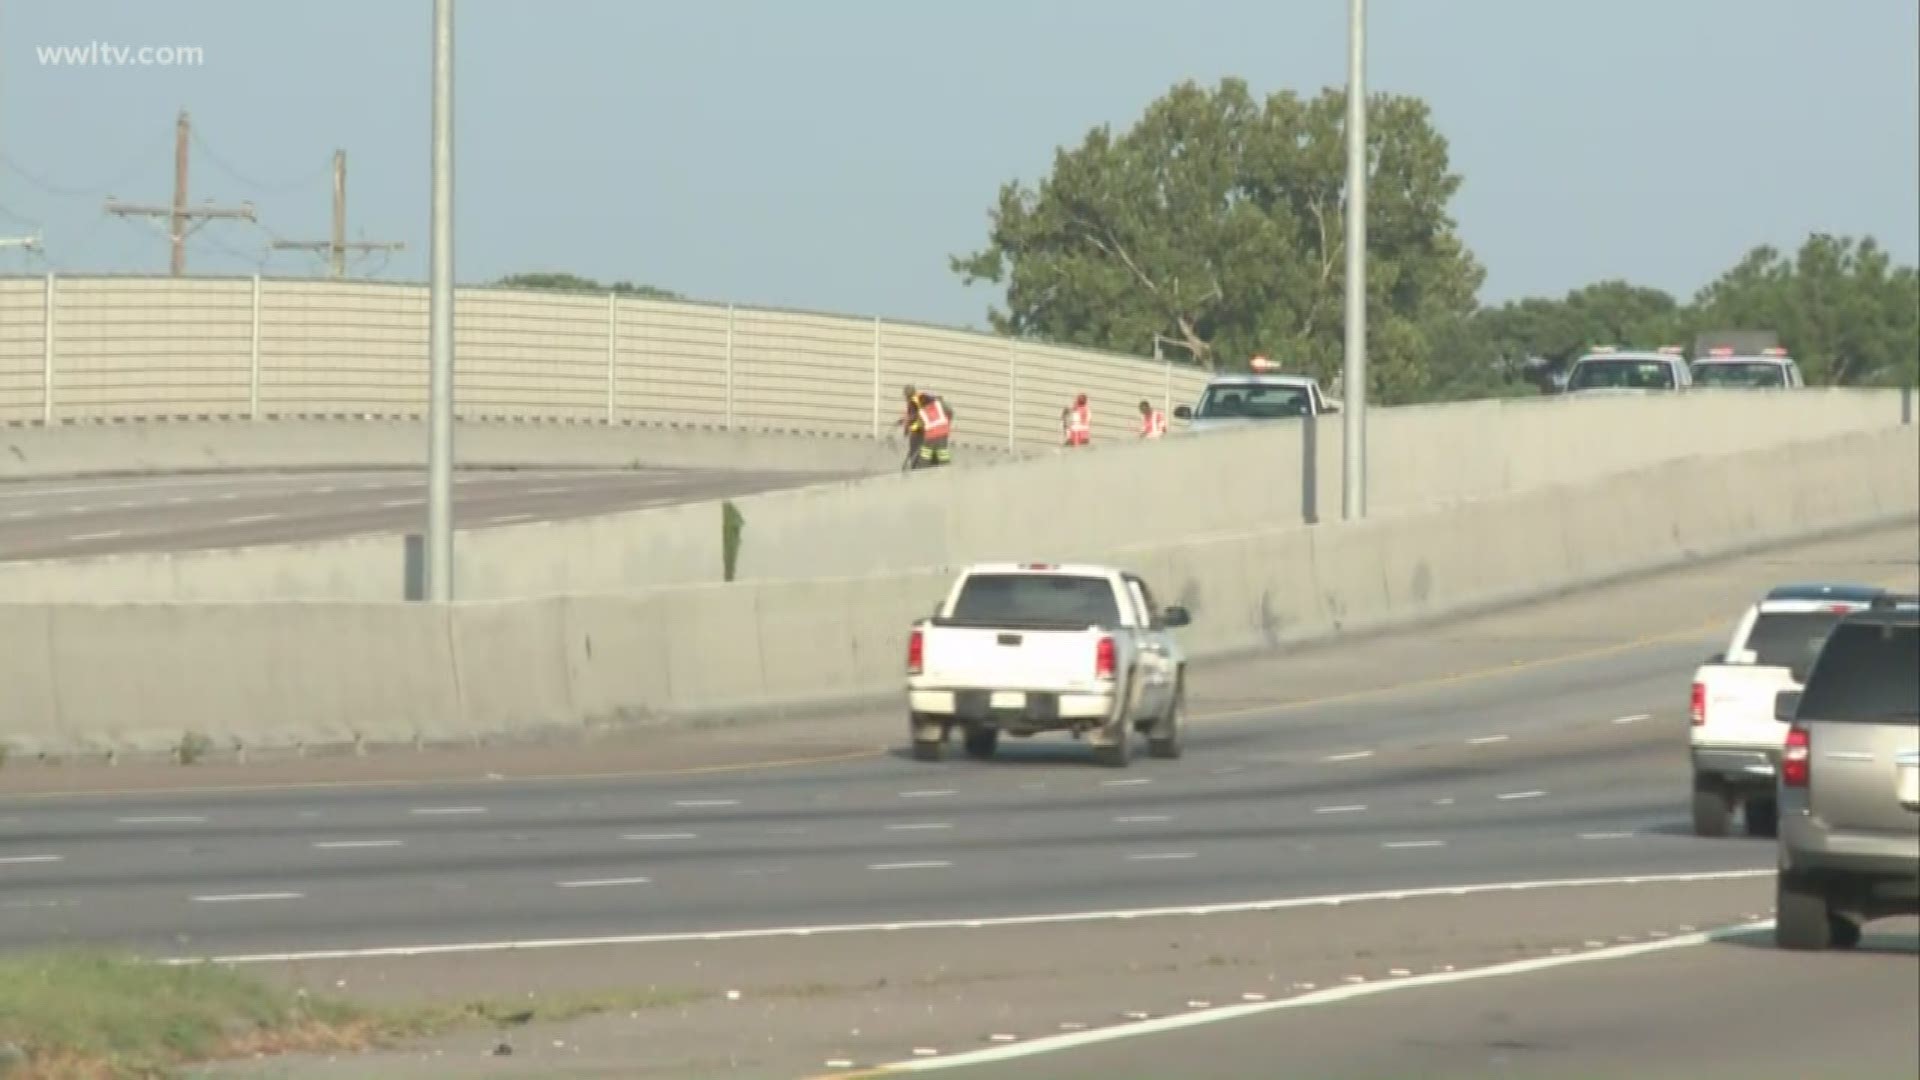 All eastbound lanes on Interstate 10 were closed in Jefferson Parish after a multi-vehicle crash Wednesday morning.

Louisiana State Police tell WWL-TV that the crash happened shortly before 6:30 a.m. and involved an 18-wheeler.